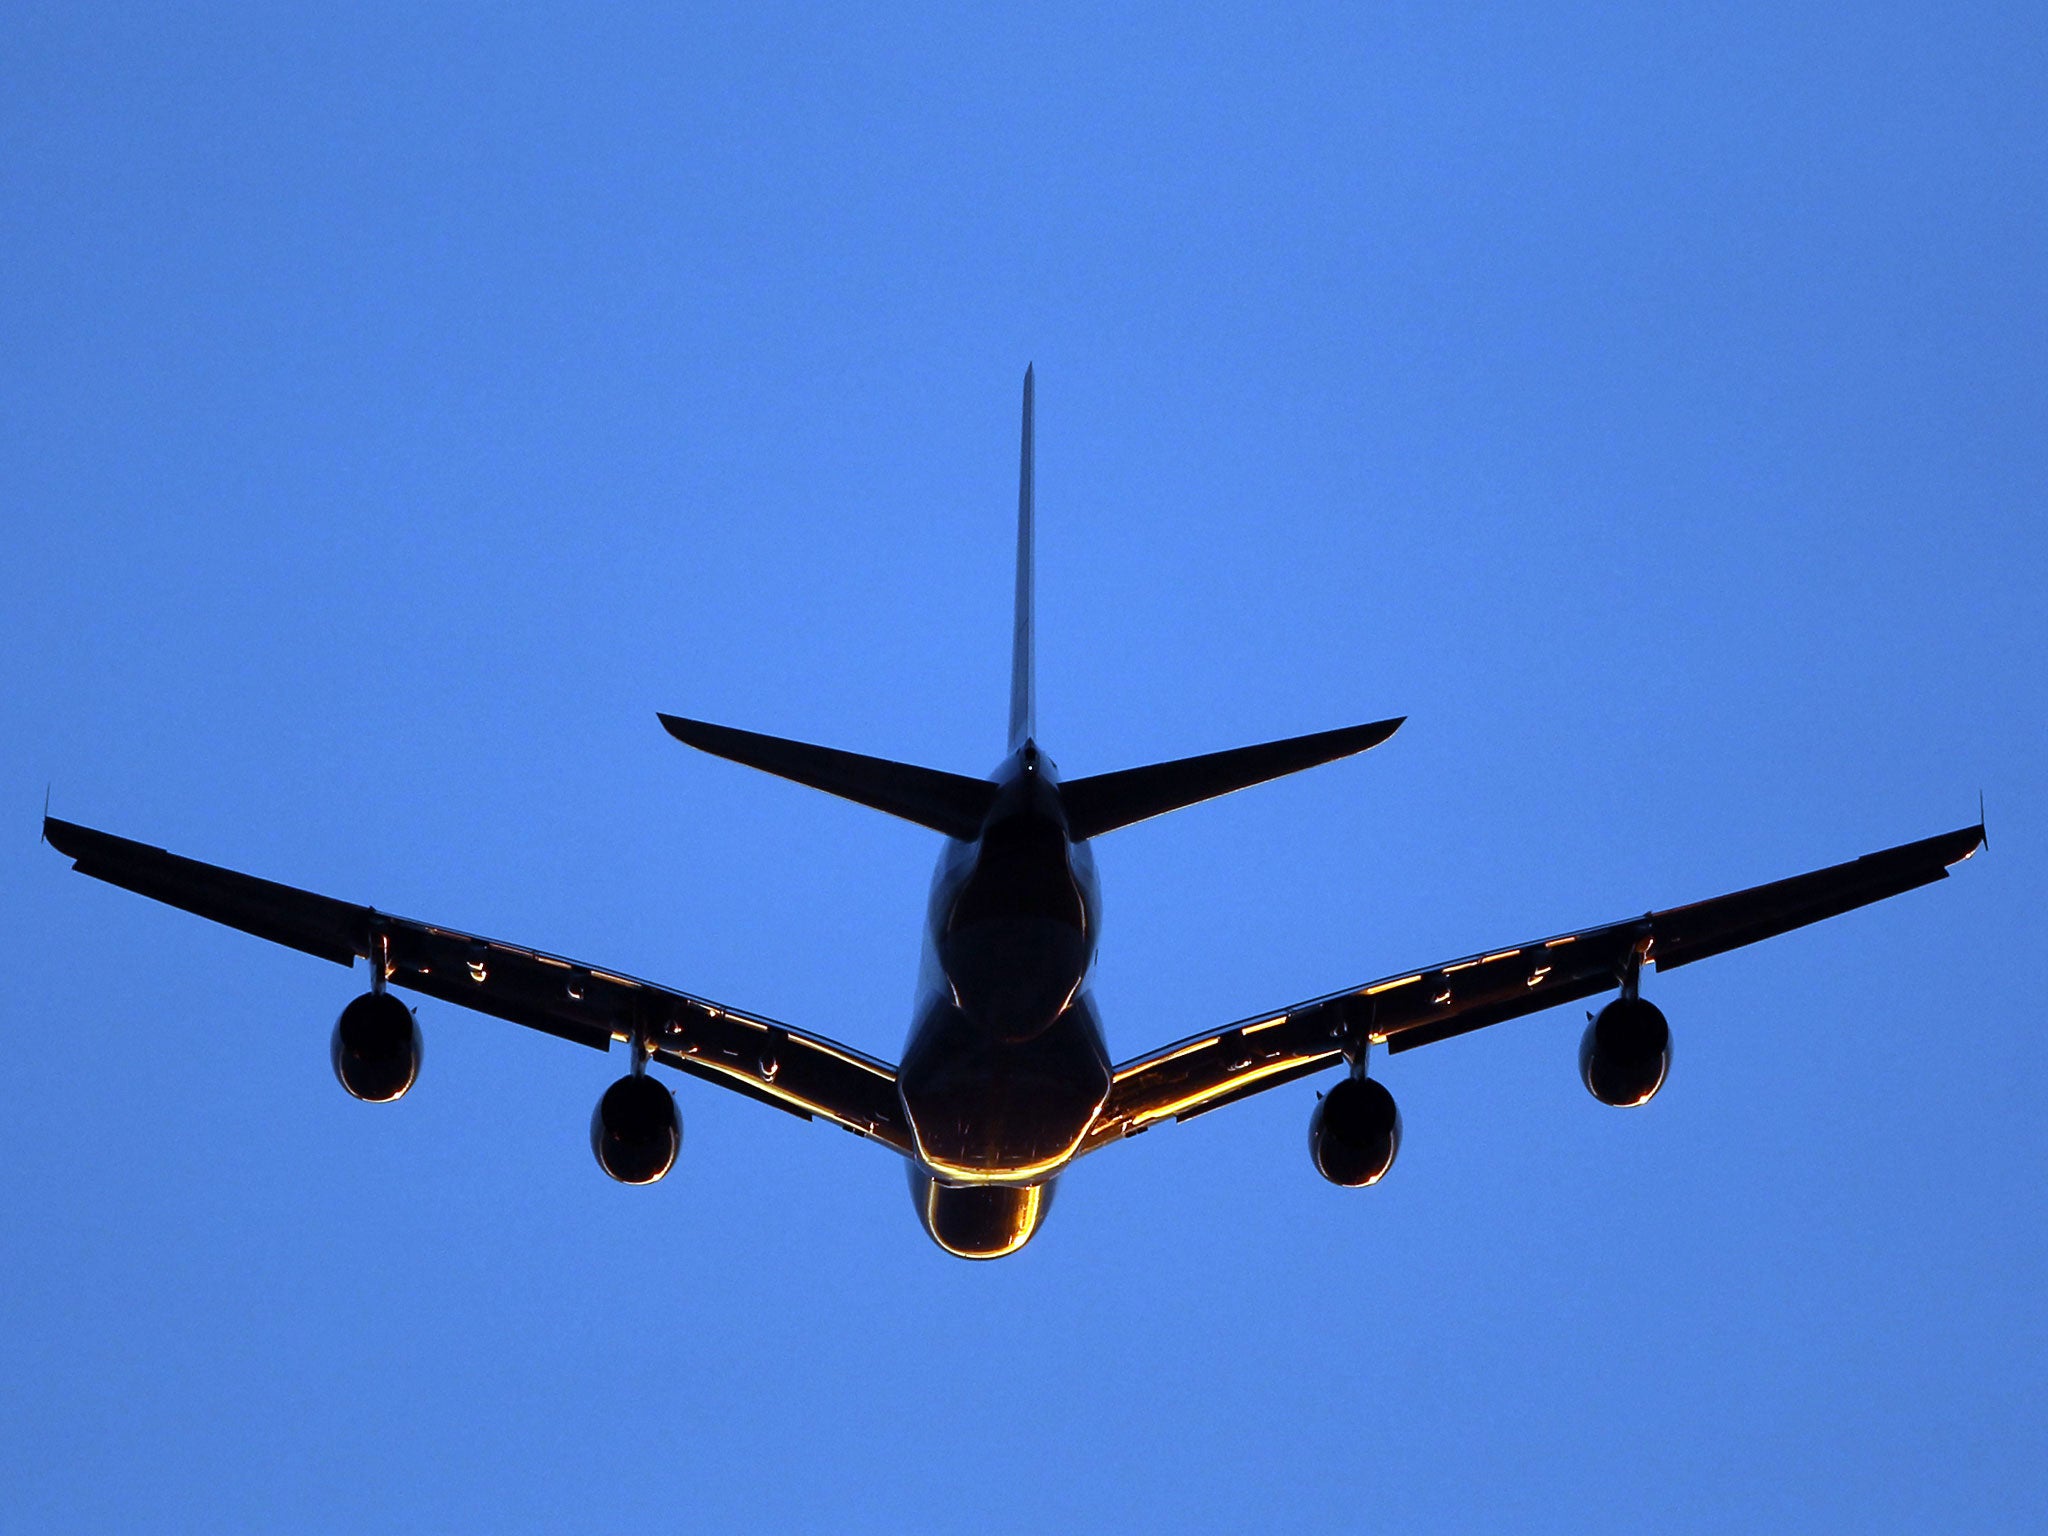 Heathrow needs a third runway and possibly a fourth, Labour MP Louise Ellman has said